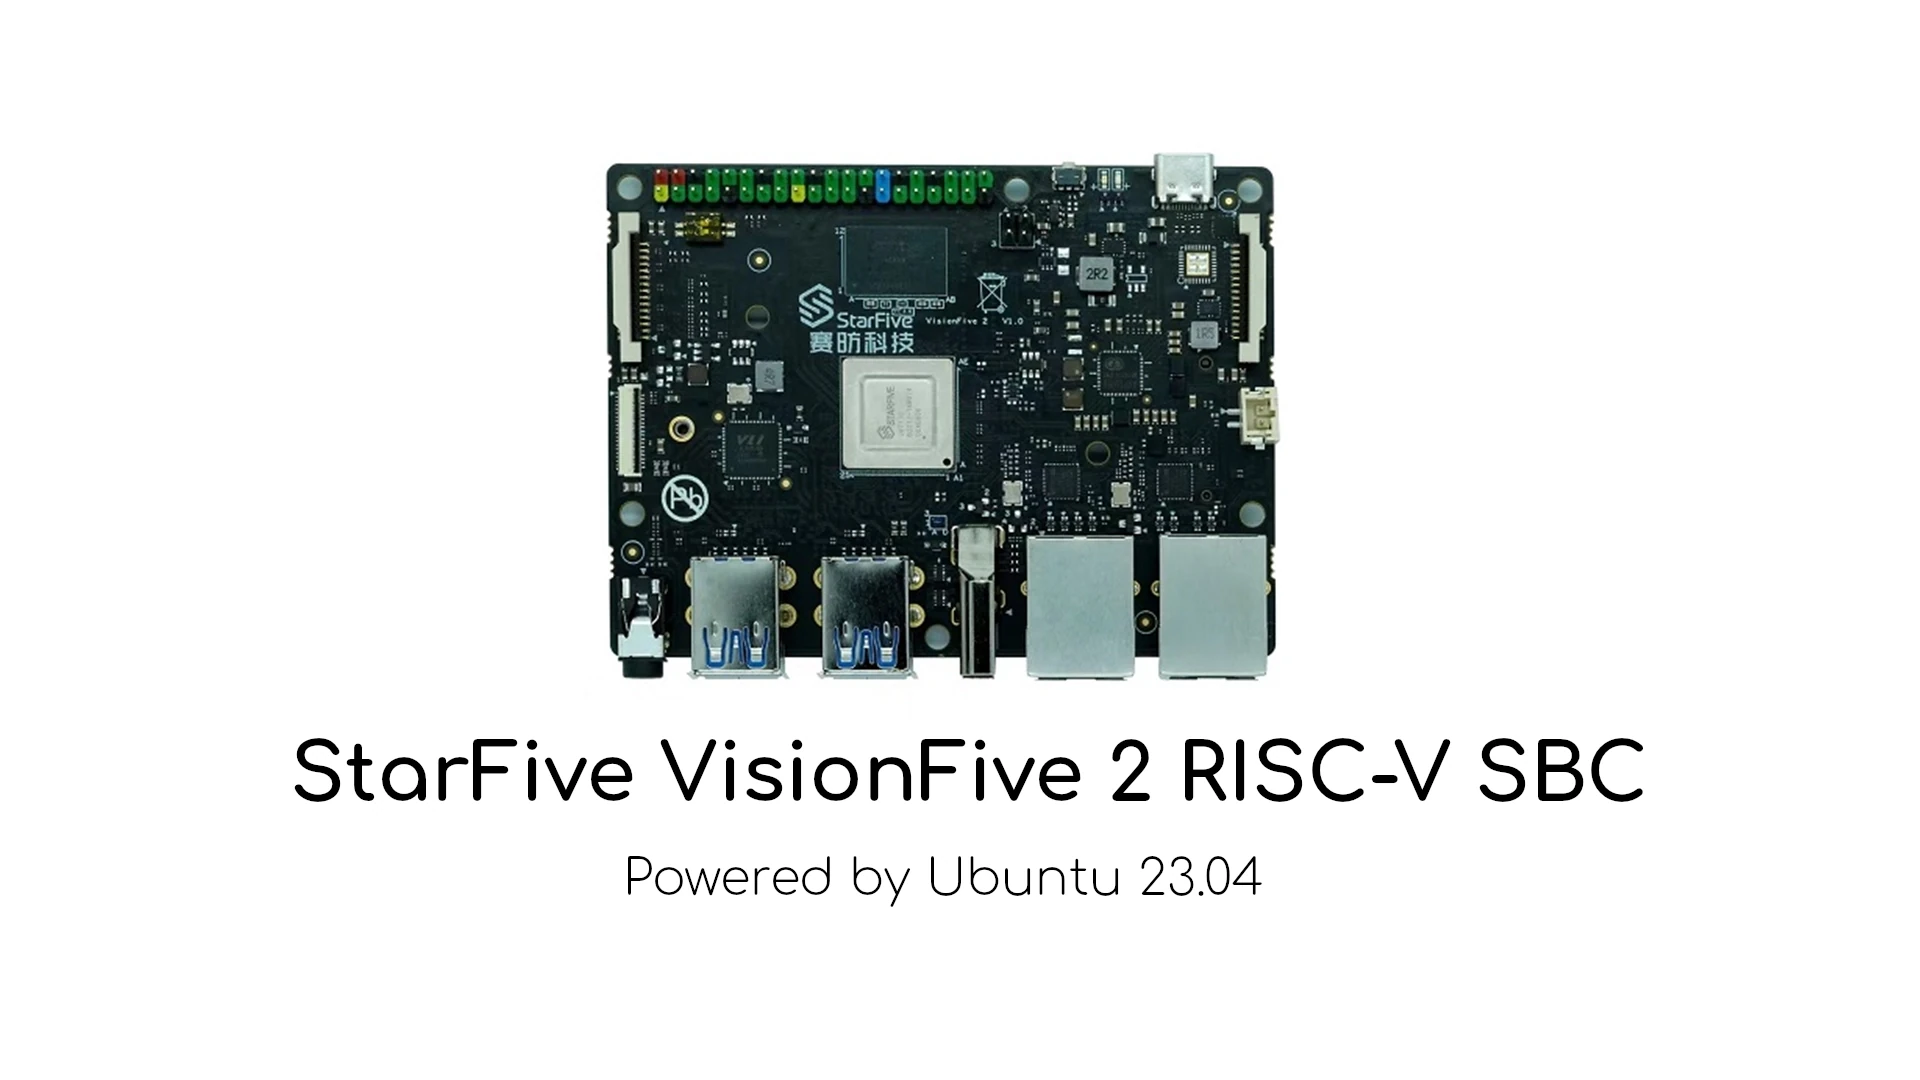 Ubuntu 23.04 Now Works on StarFive’s VisionFive 2 RISC-V Single-Board Computer